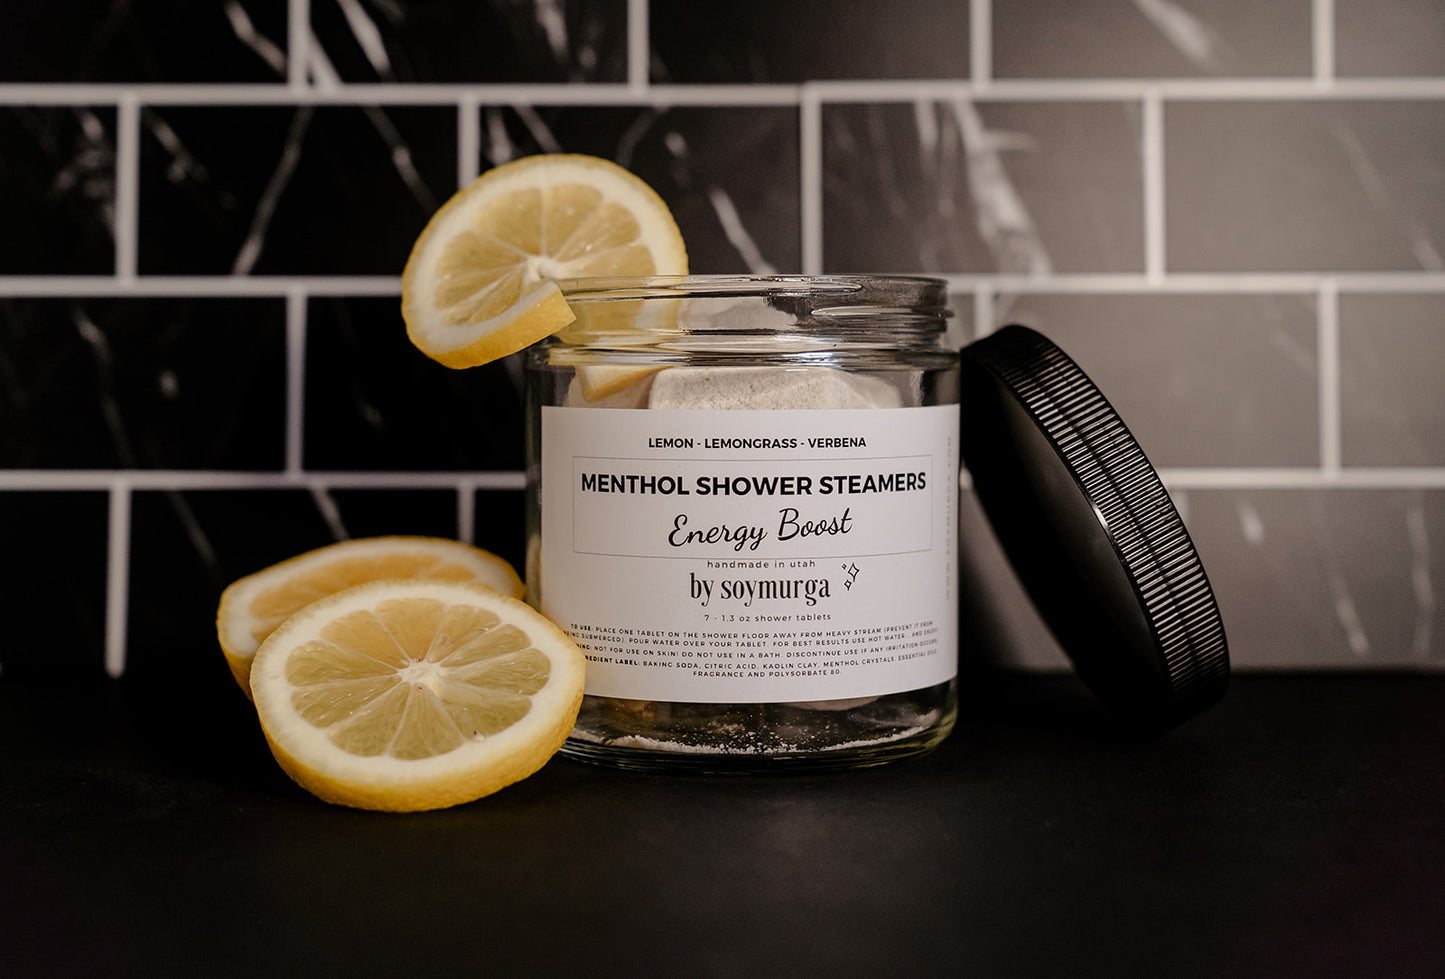 Energy Boost - Menthol Shower Steamers